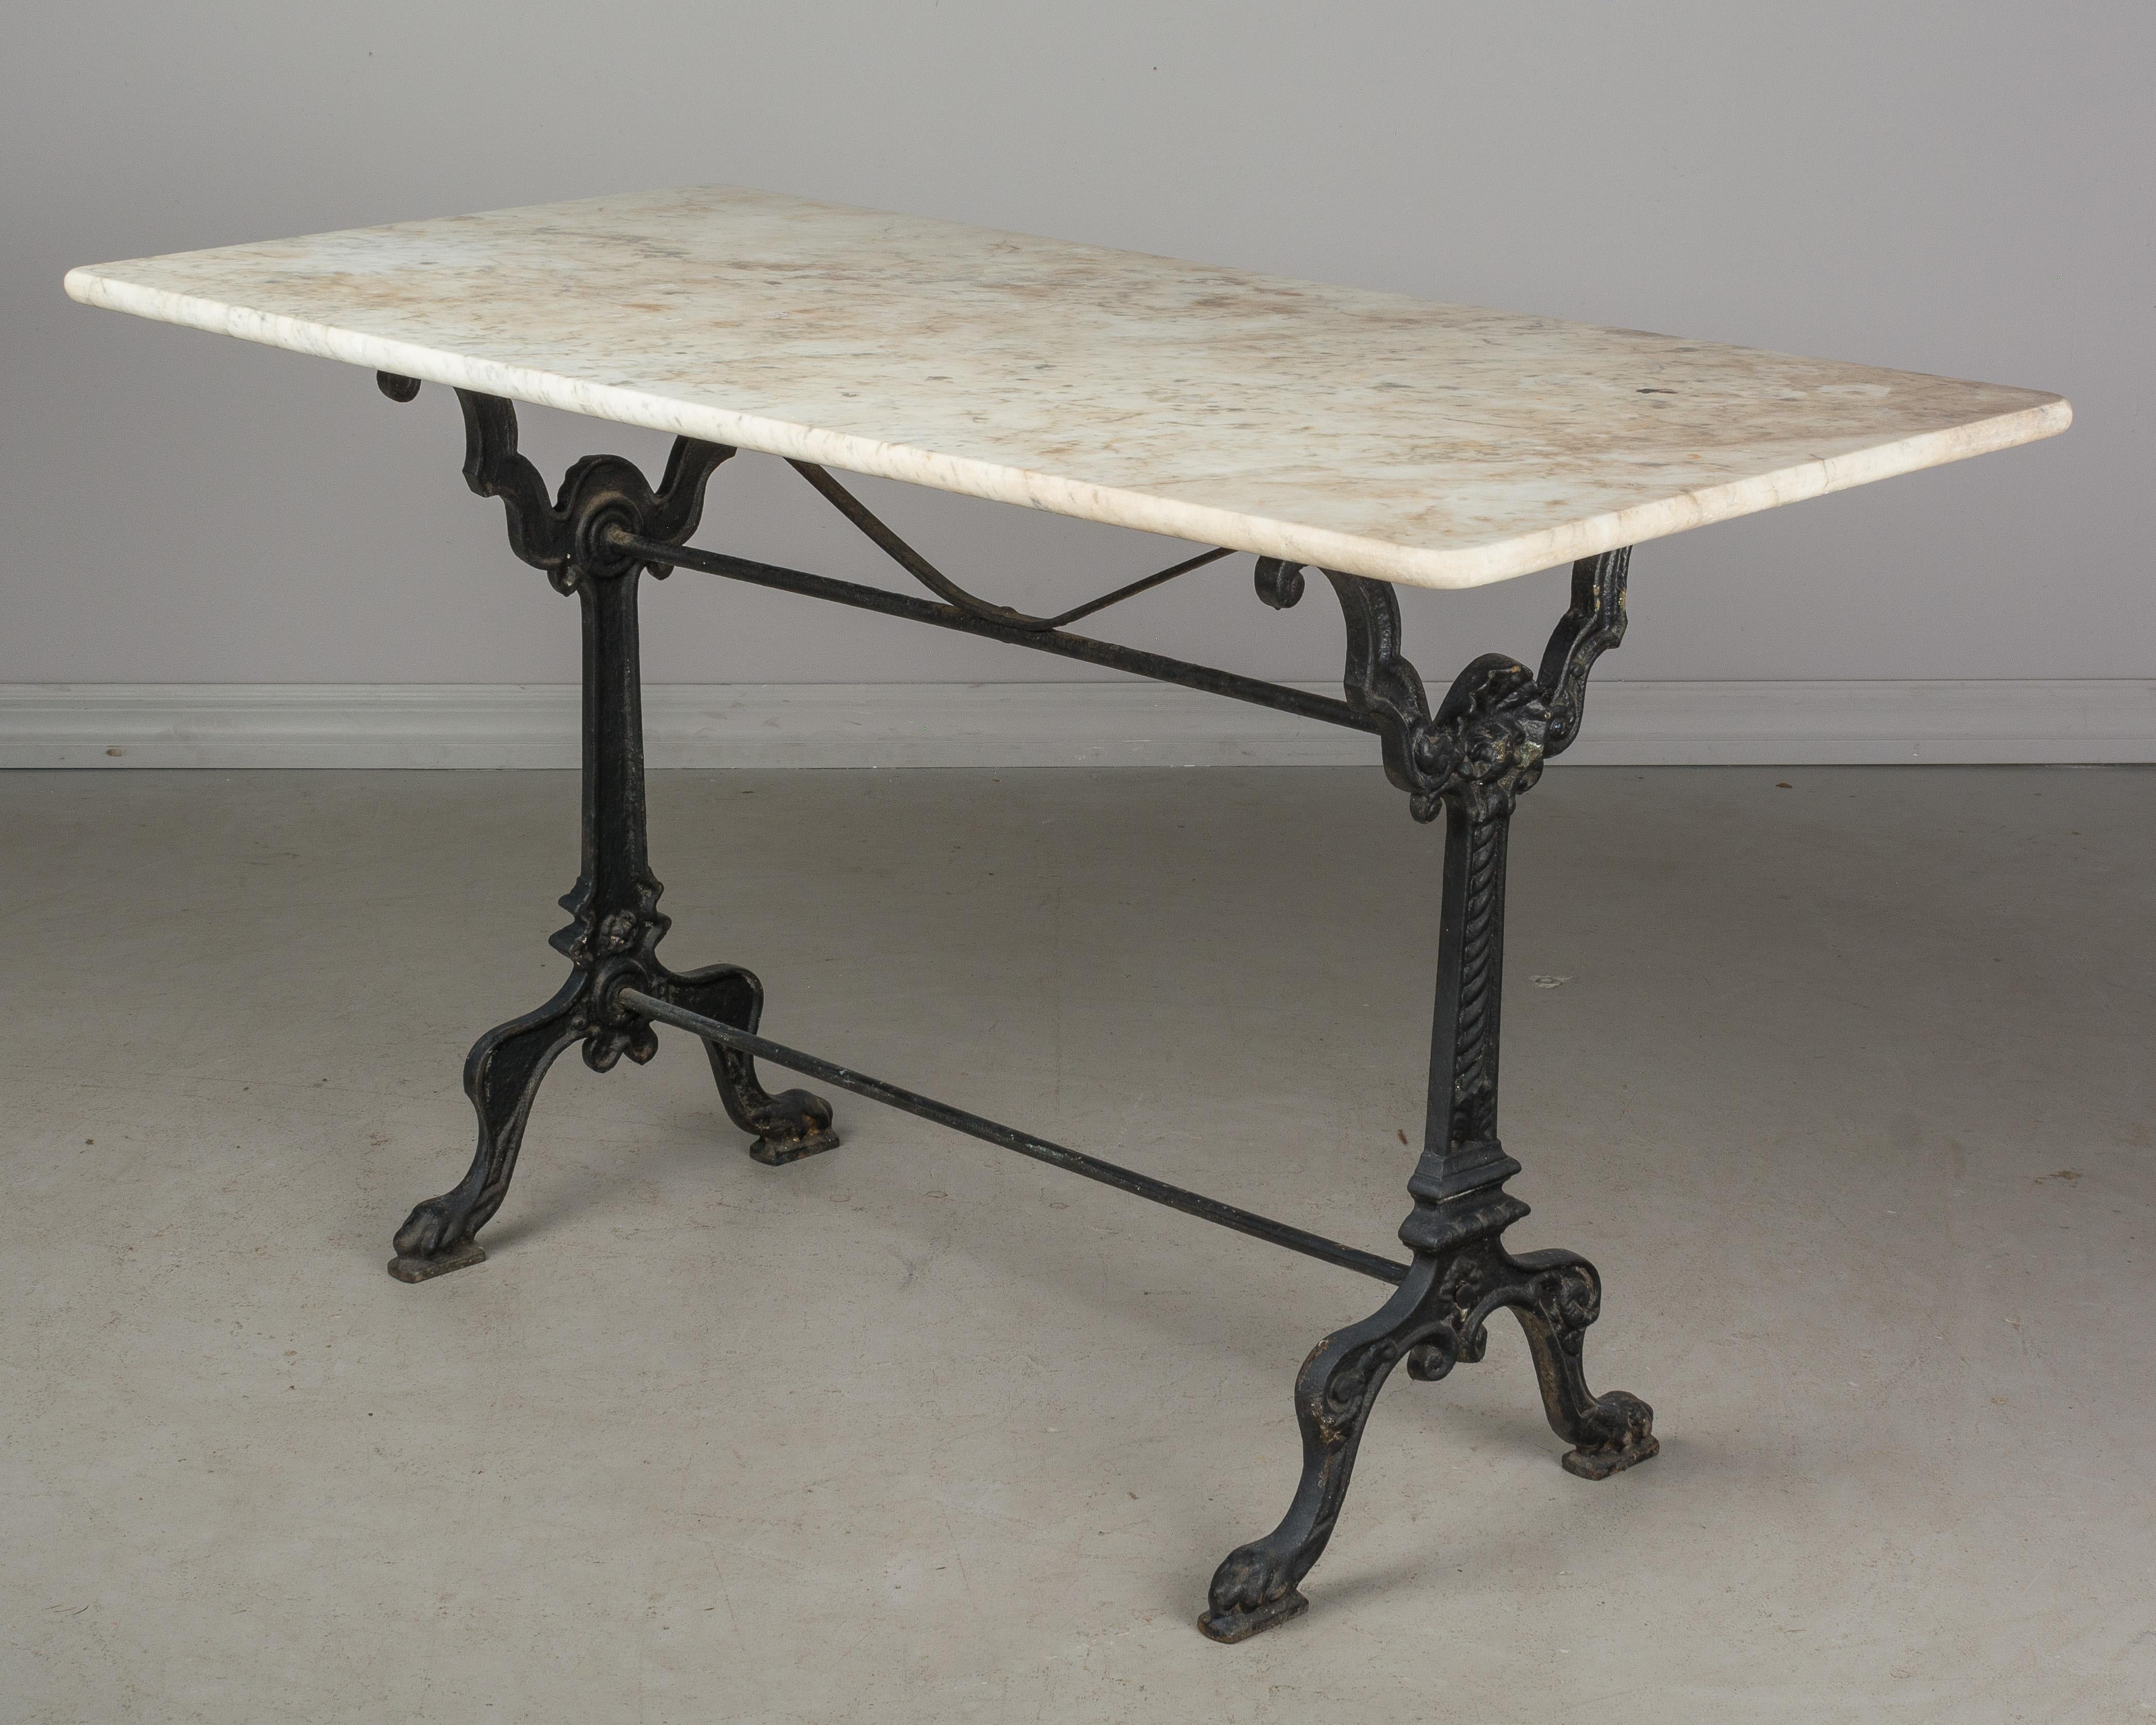 A 19th century French cast iron bistro table with marble top. Nice casting with shell medallion and paw feet. Old black painted patina. Original marble top. Great for indoor or outdoor.